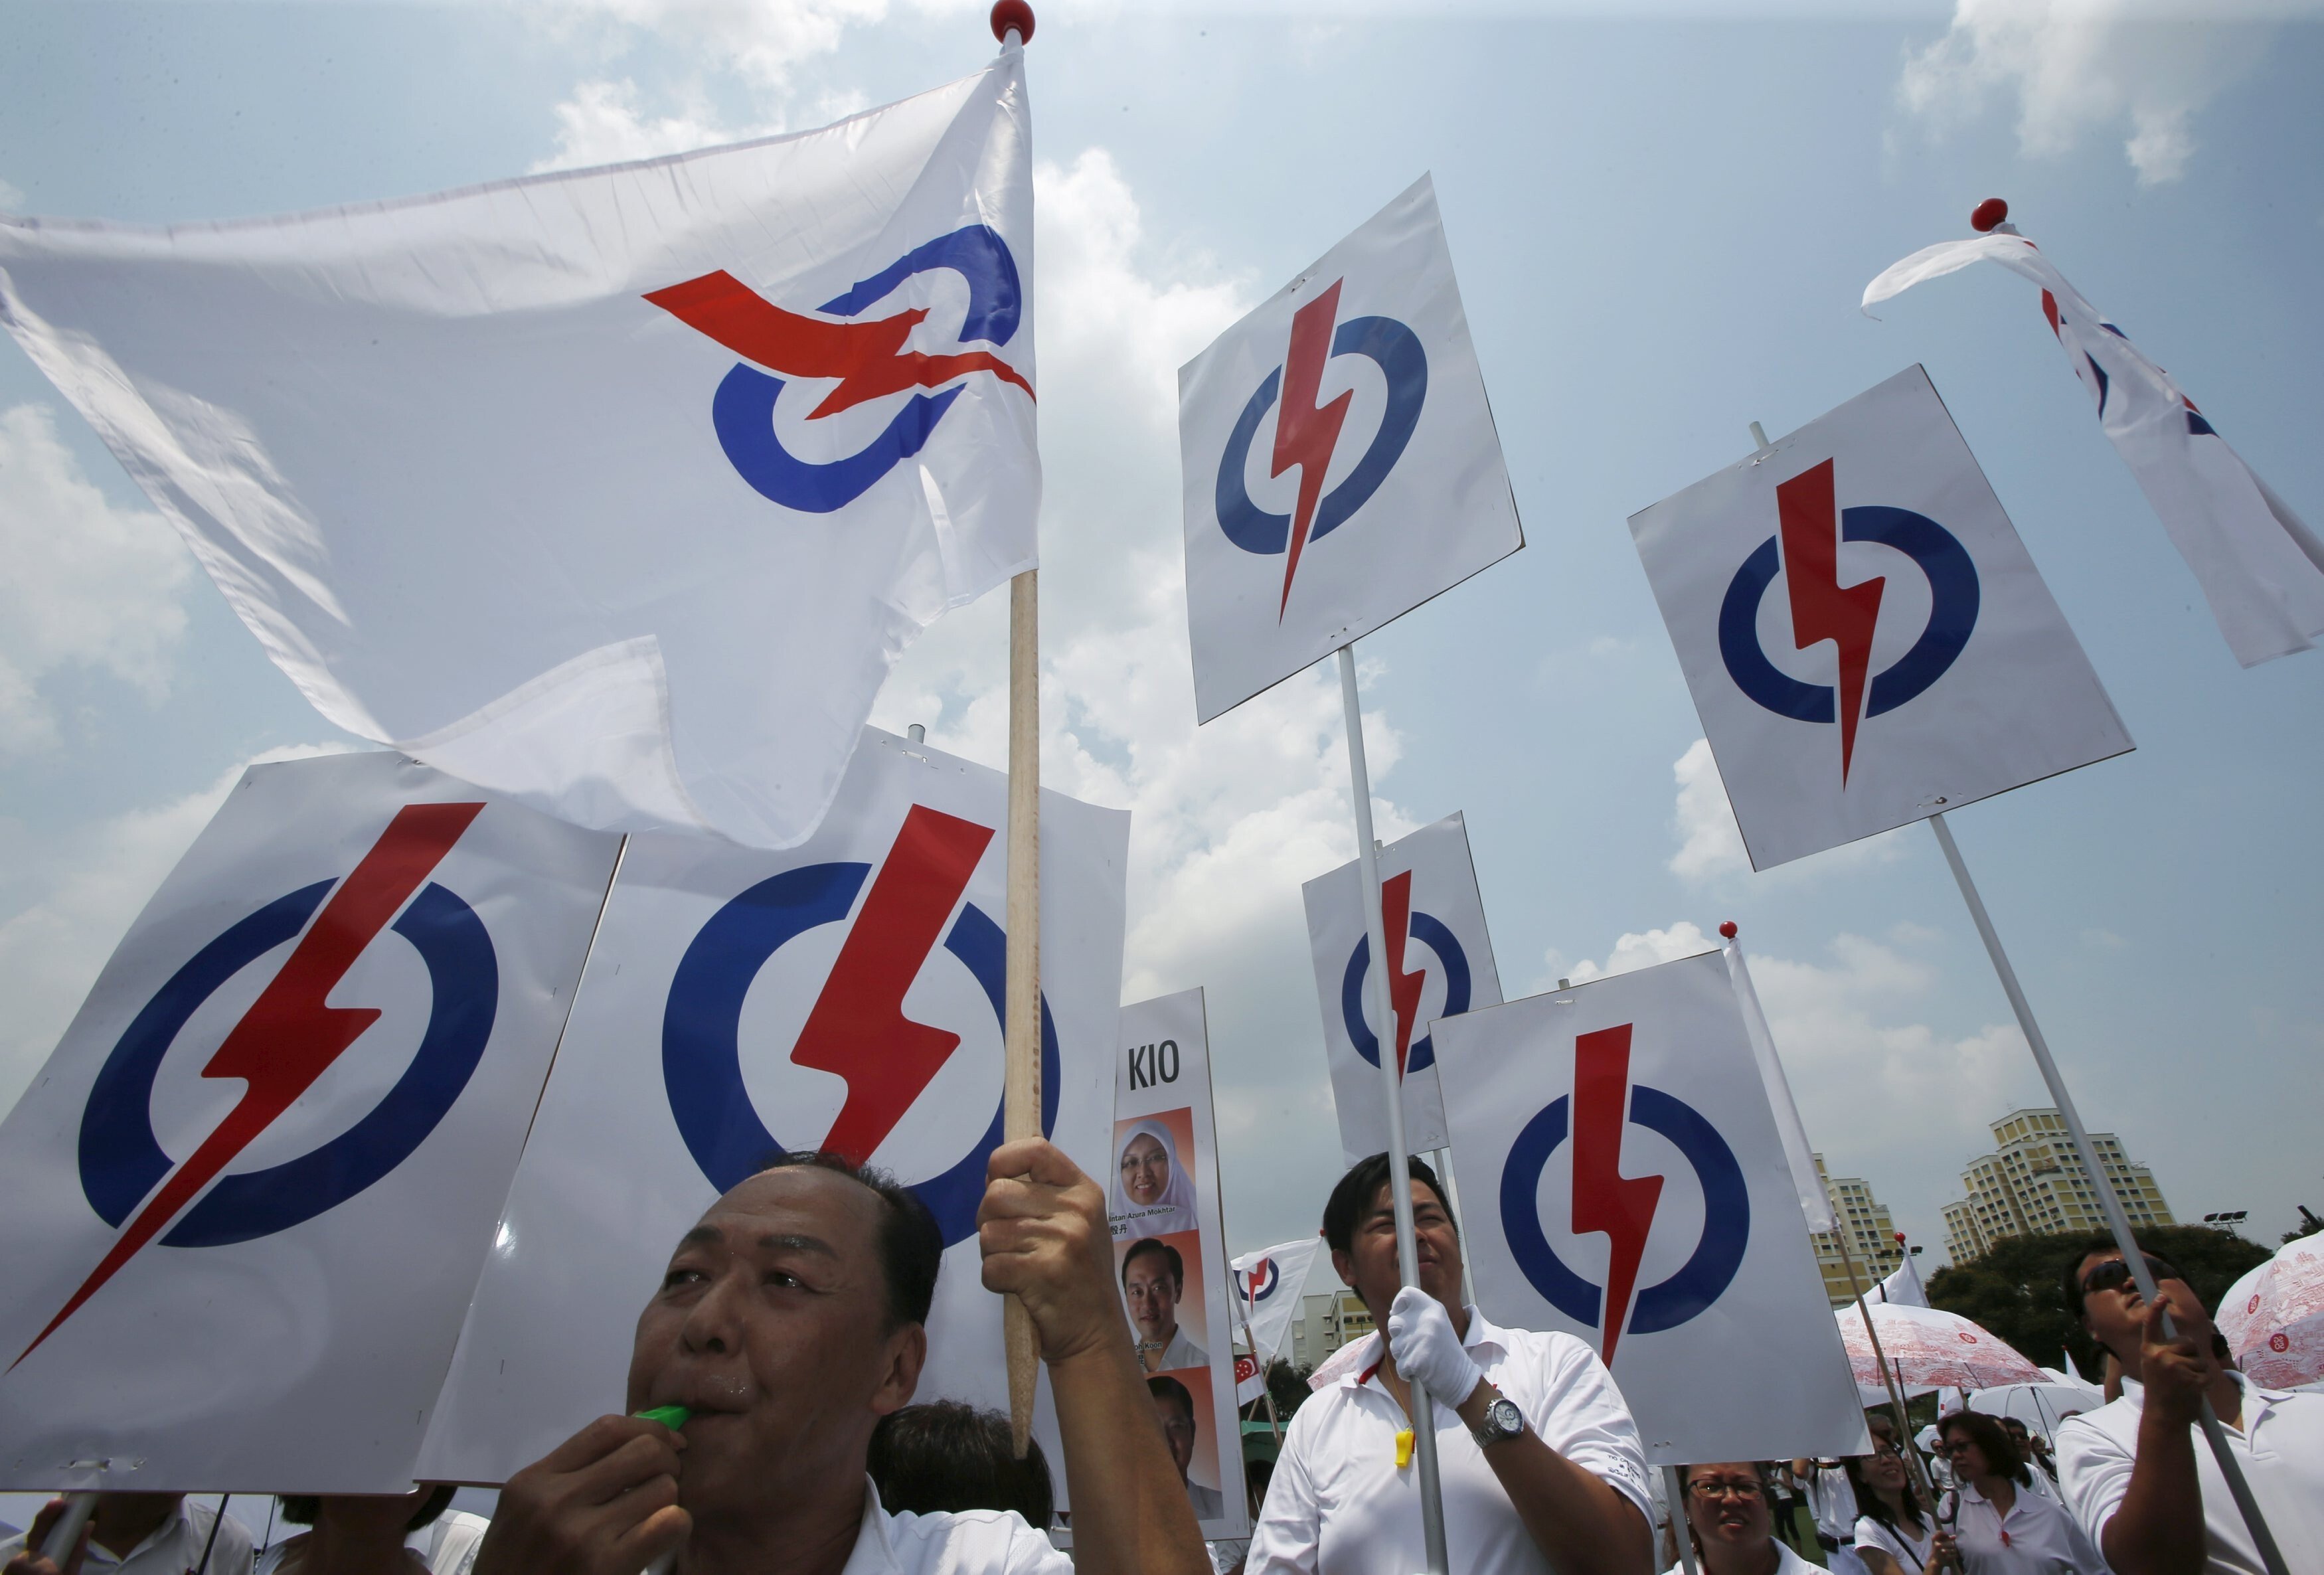 Singapore's People's Action Party (PAP) has been in power since 1959. Photo: Reuters